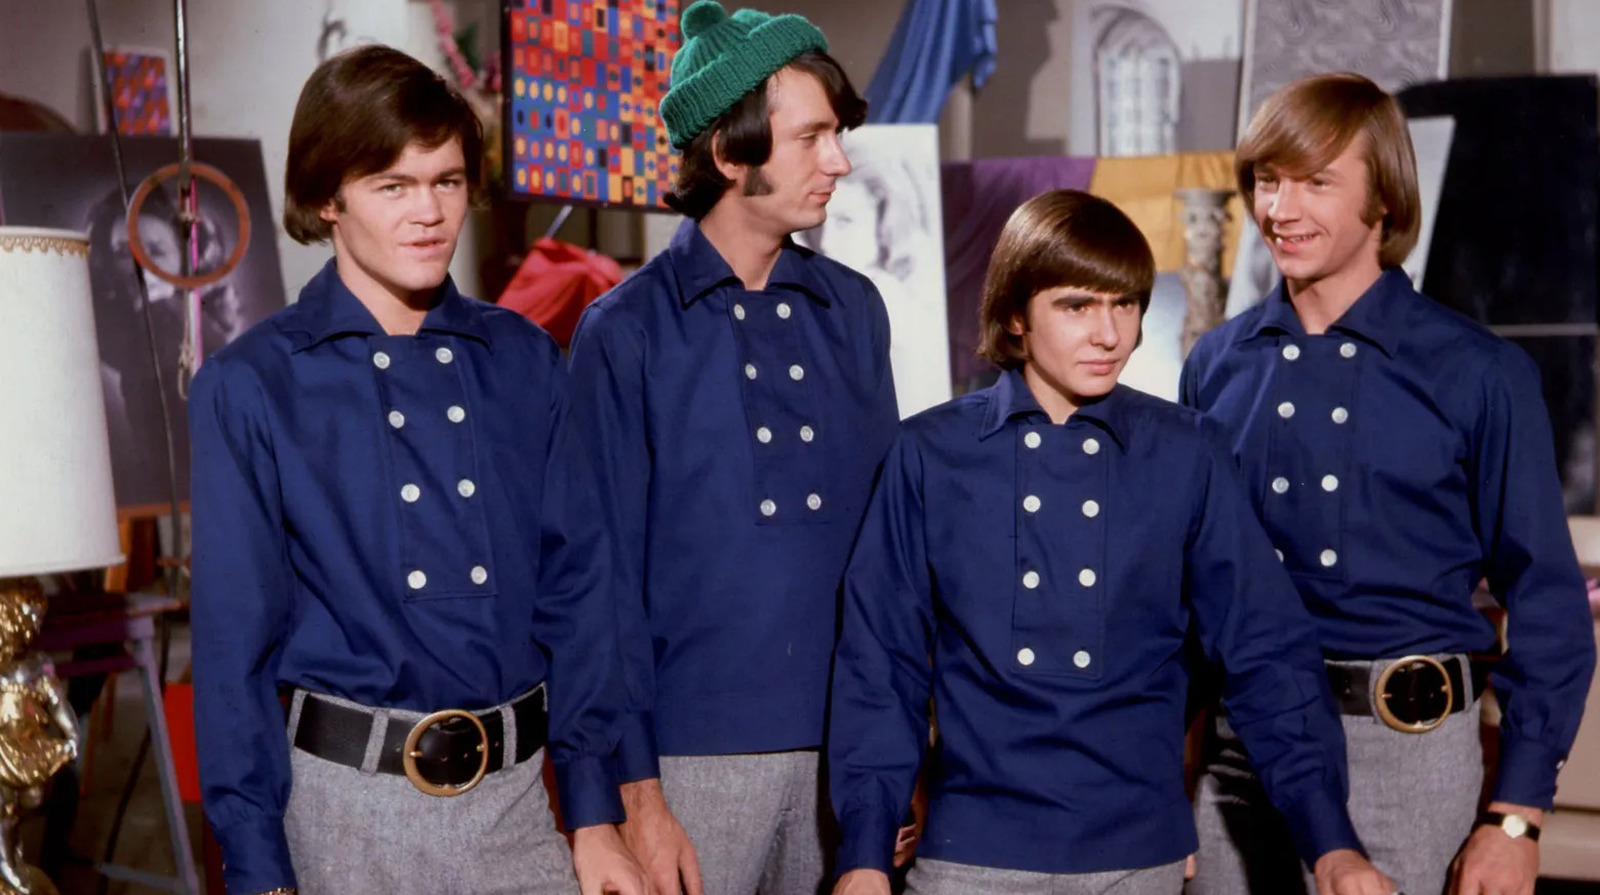 The Only Major Actors Still Alive From The Monkees